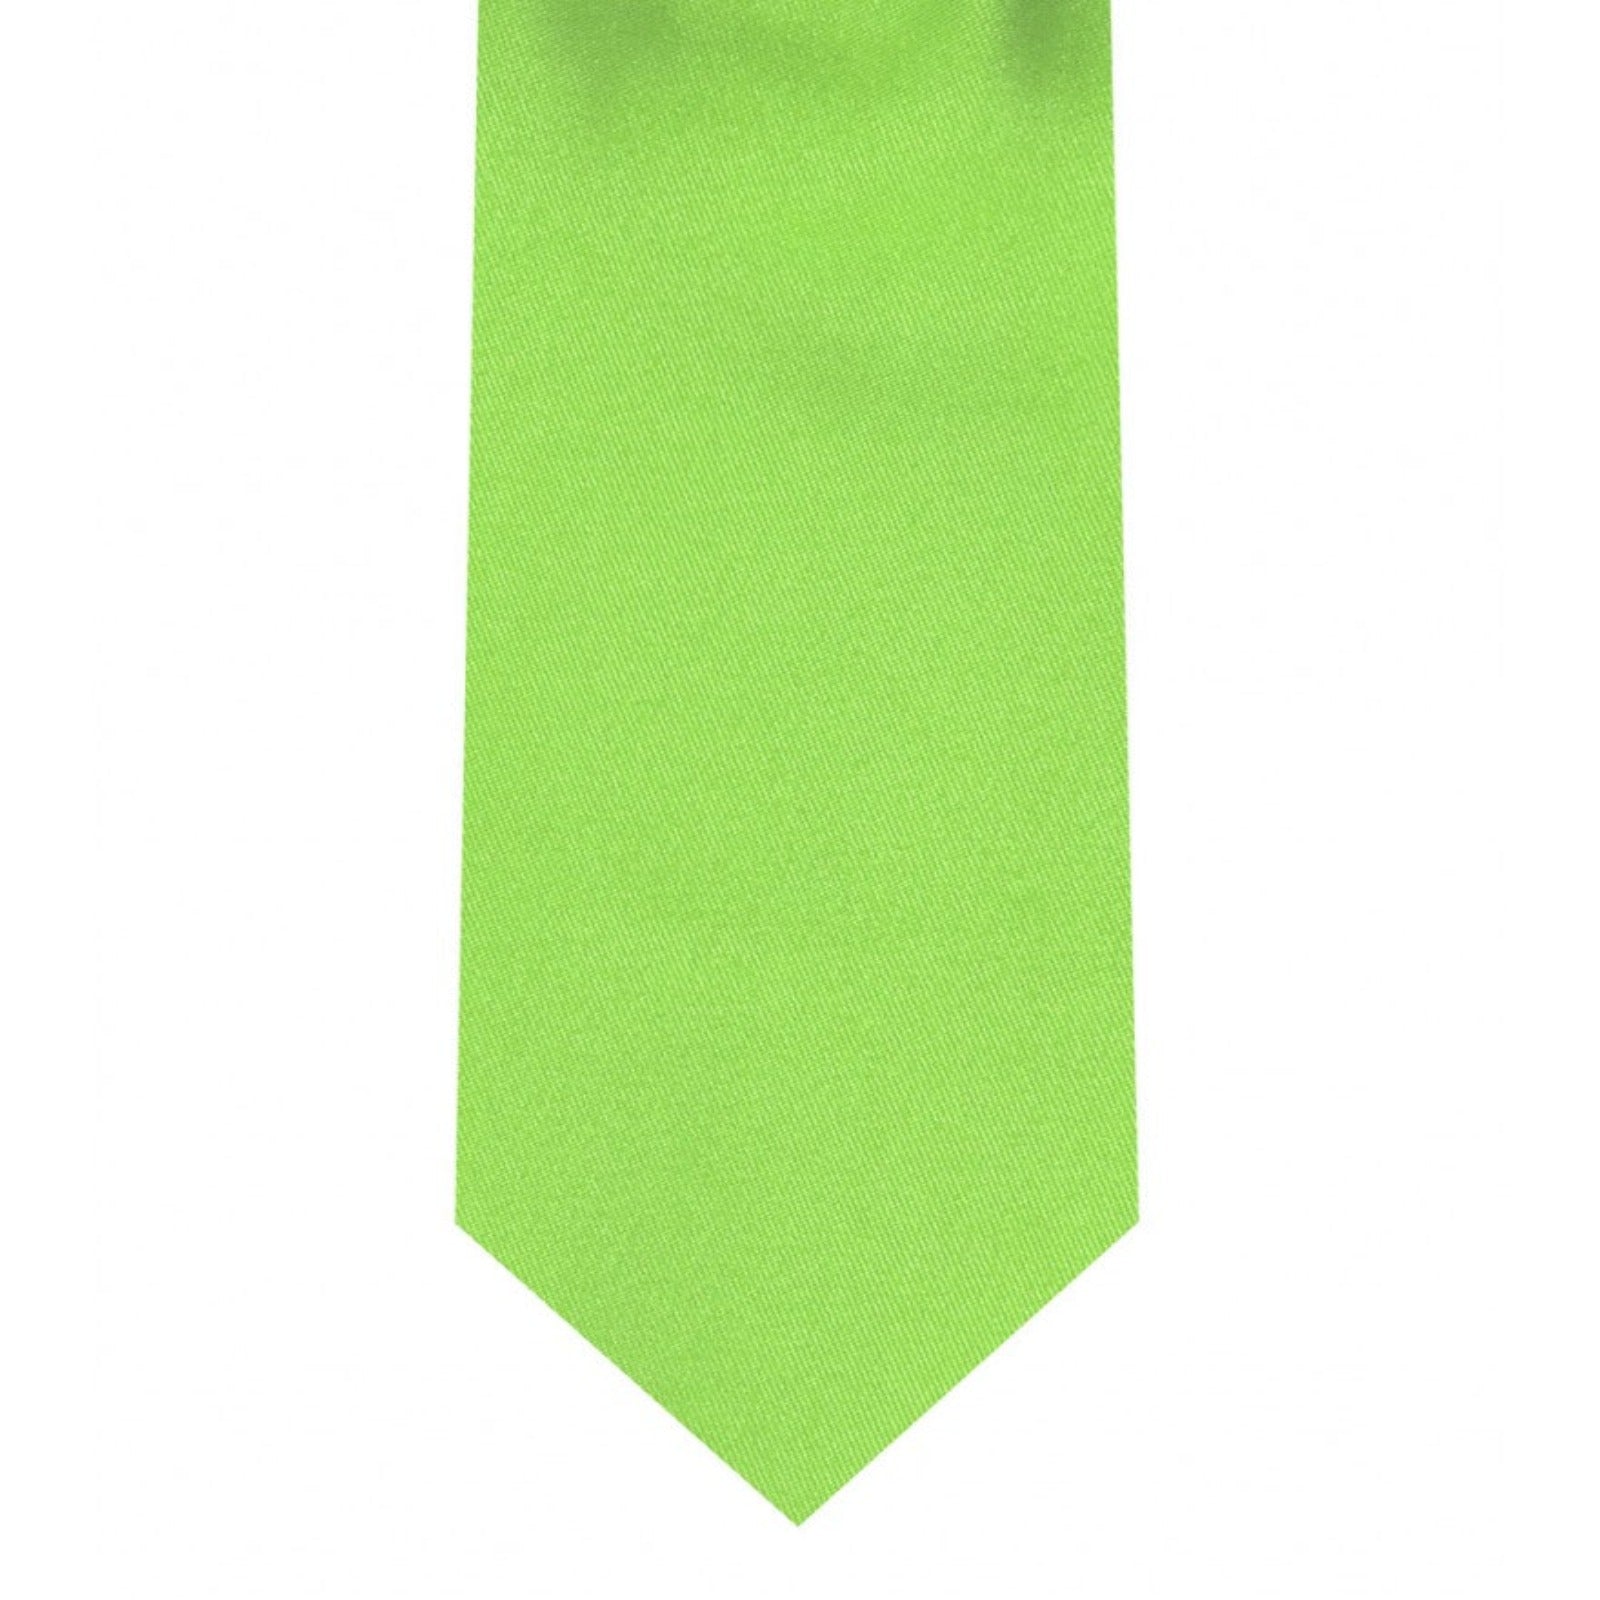 Classic Lime Tie Skinny width 2.75 inches With Matching Pocket Square | KCT Menswear 